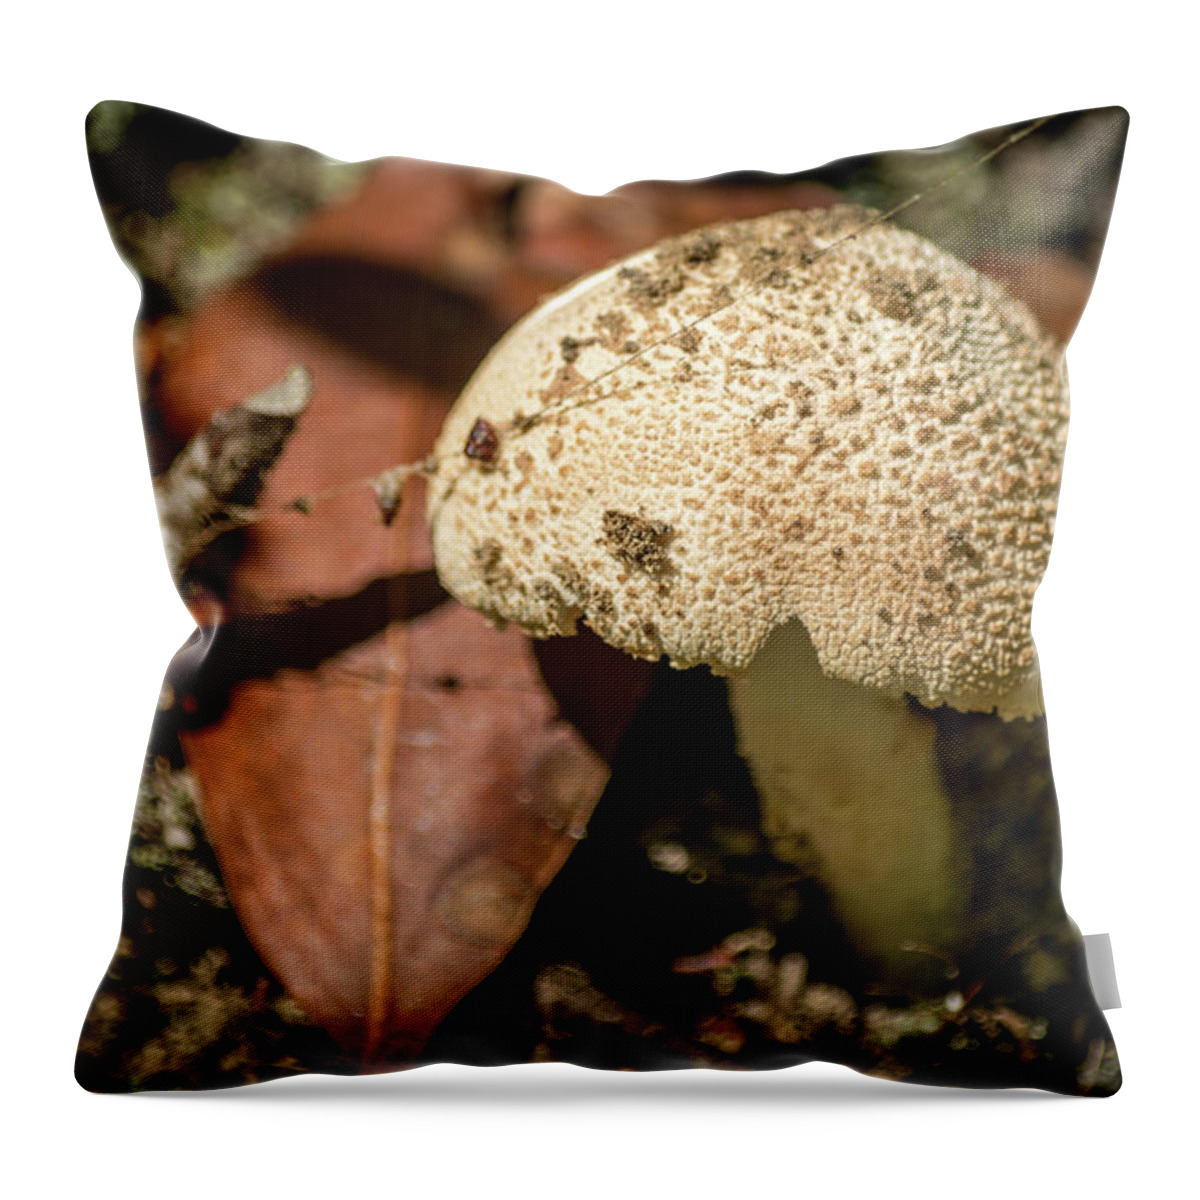 Nature Throw Pillow featuring the photograph Woodland Mushroom by Andy Smetzer